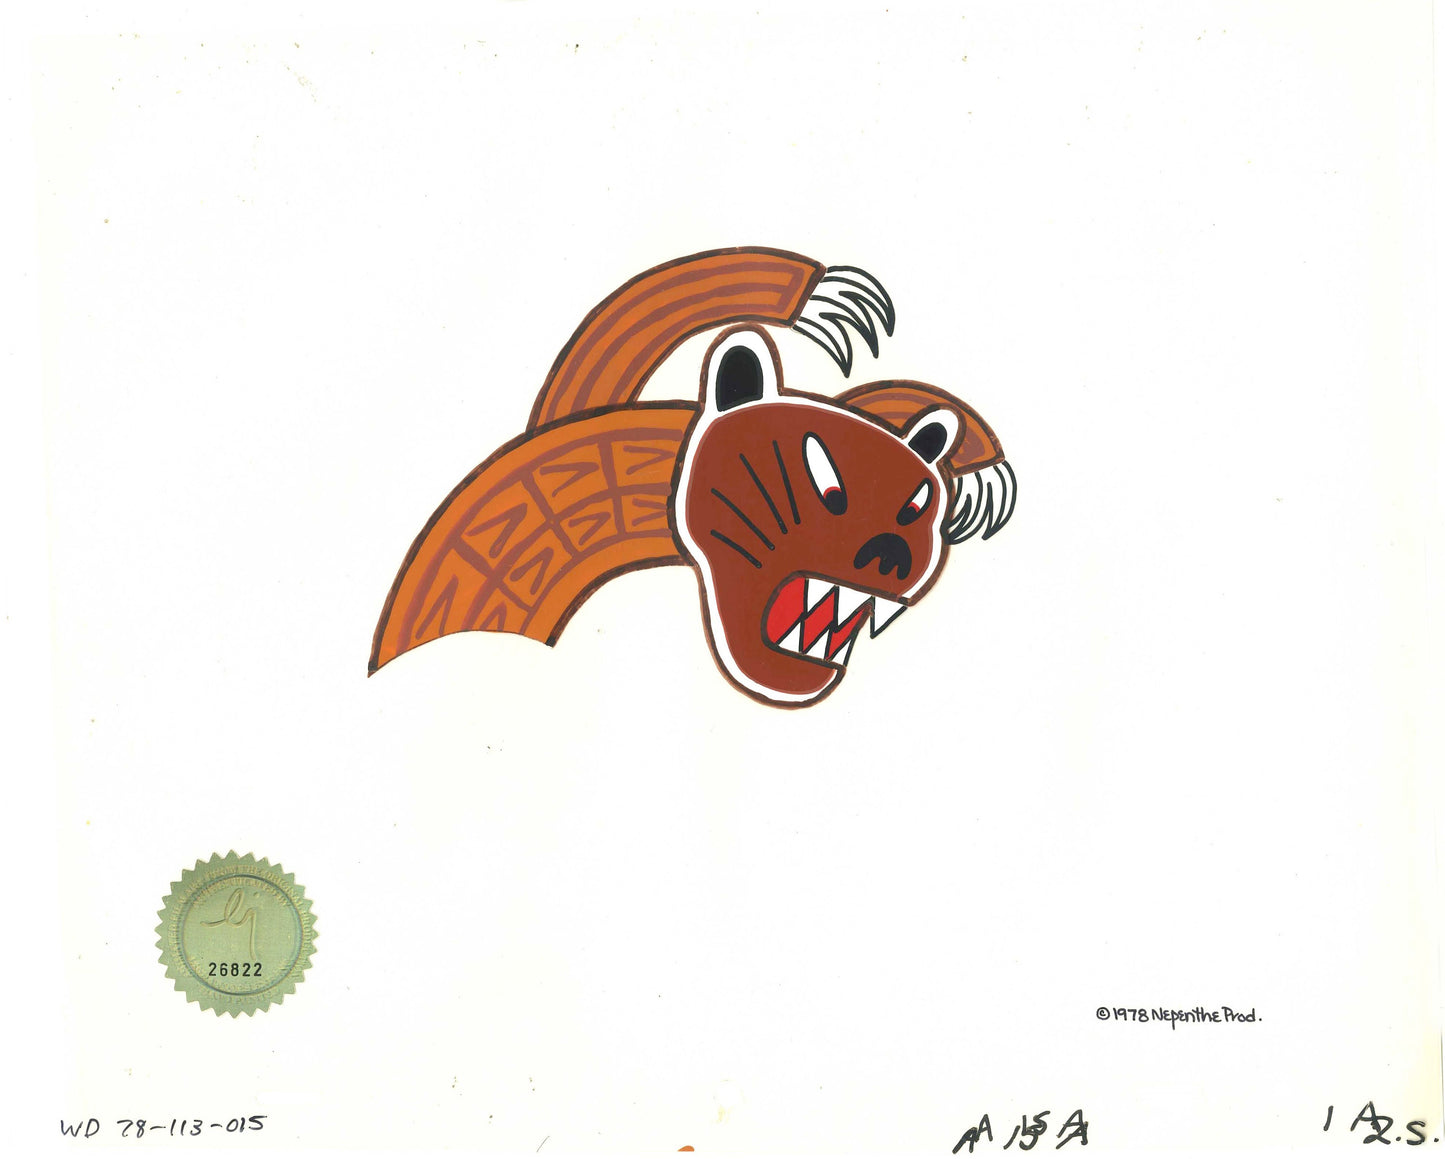 Watership Down Opening Fable El-ahrairah 1978 Production Animation Cel with LJE Seal and COA 113-015 of an Animal